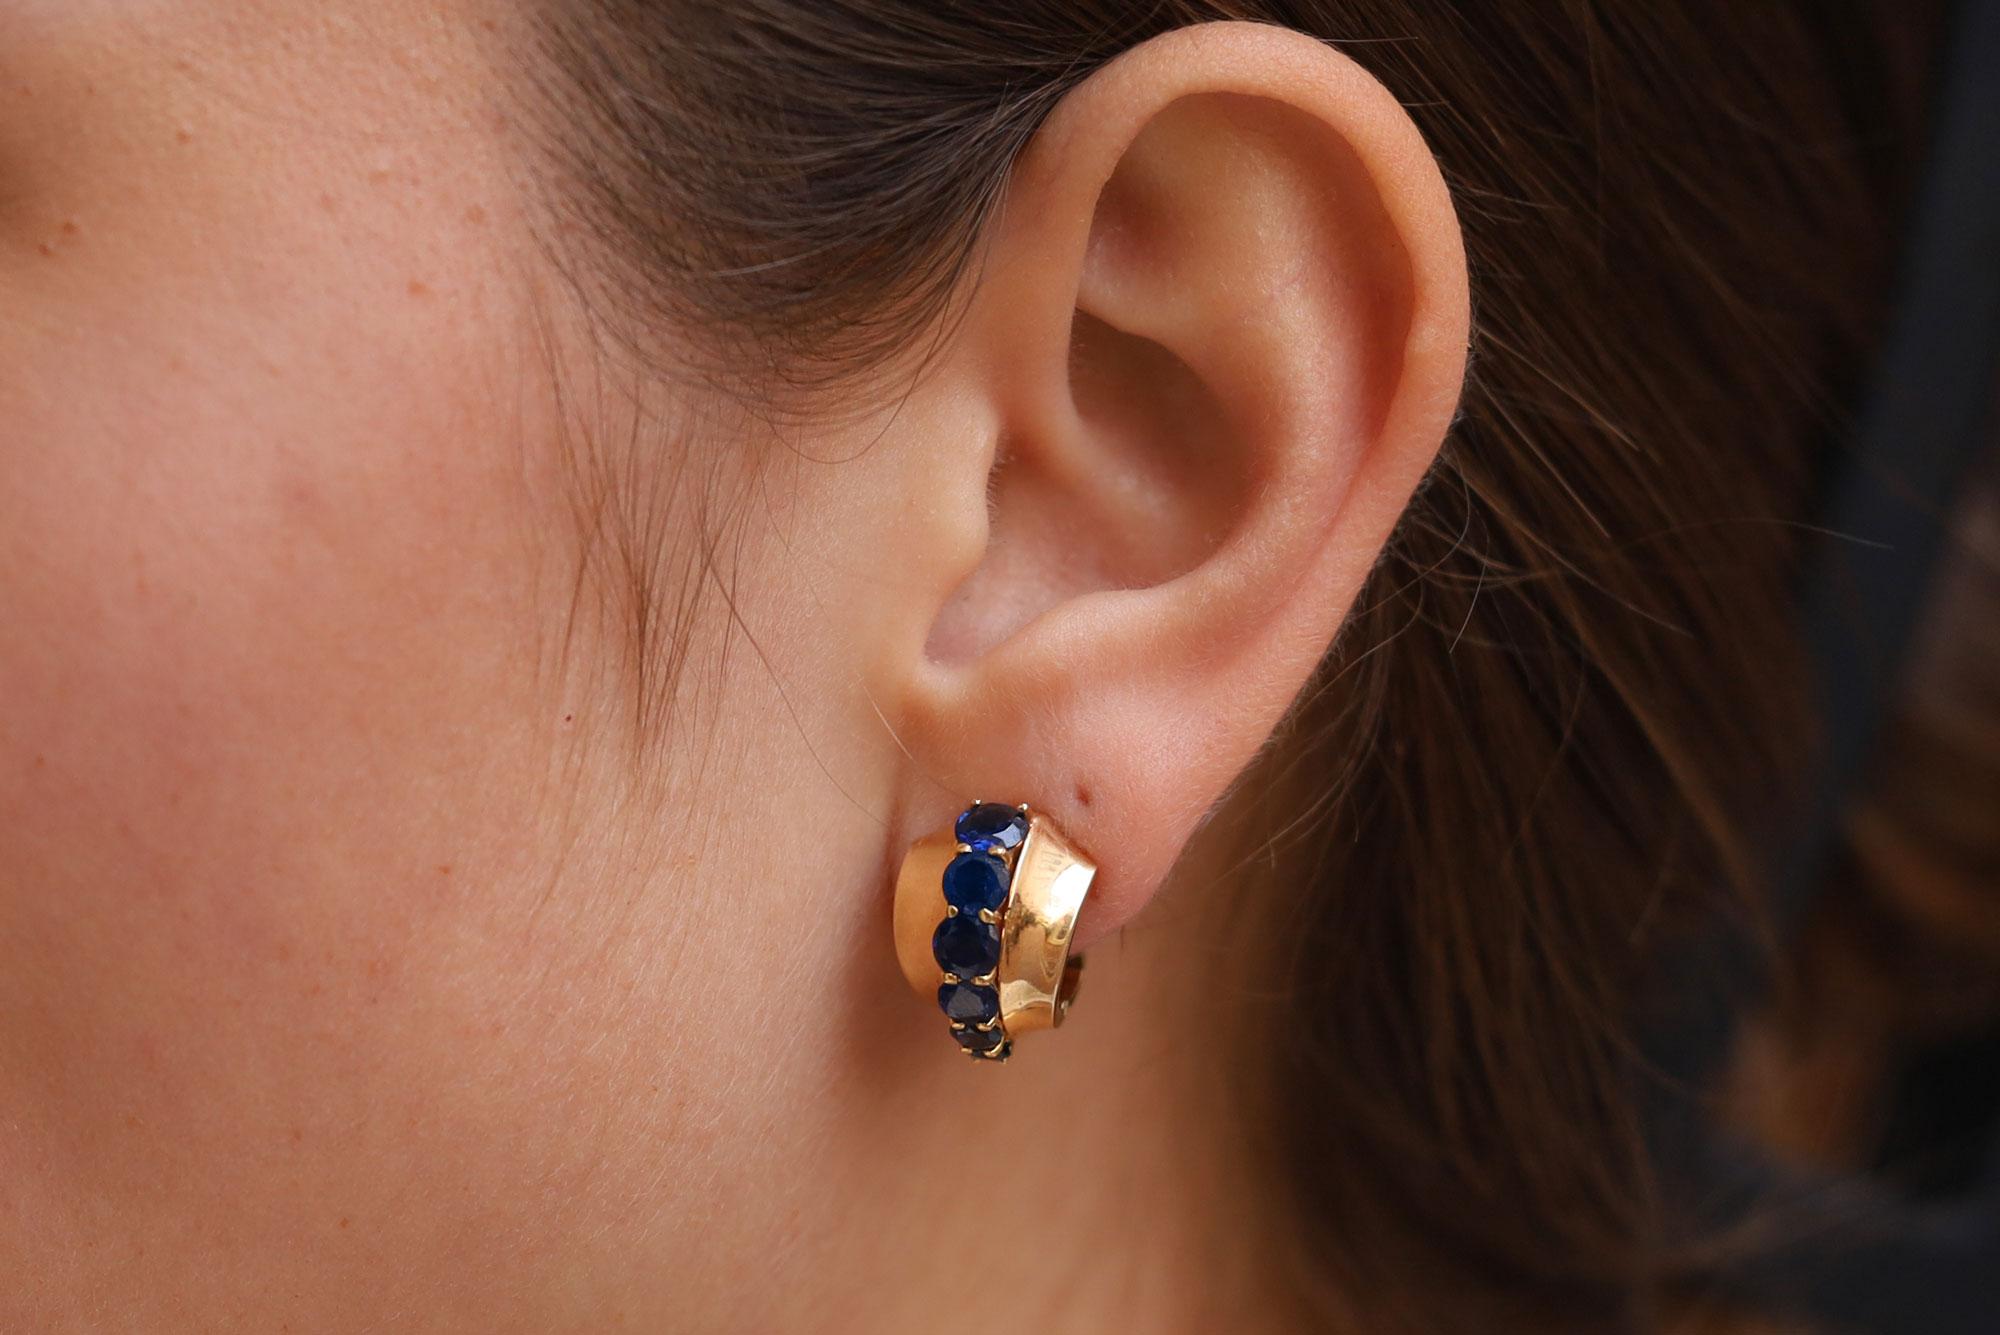 These mid-century signed Cartier earrings are an exceptional find, perfect for your vintage designer jewelry collection. 2.75 carats of natural fine blue sapphires taper down the 14k hoops with classy flair. These tasteful ear clips are comfortable